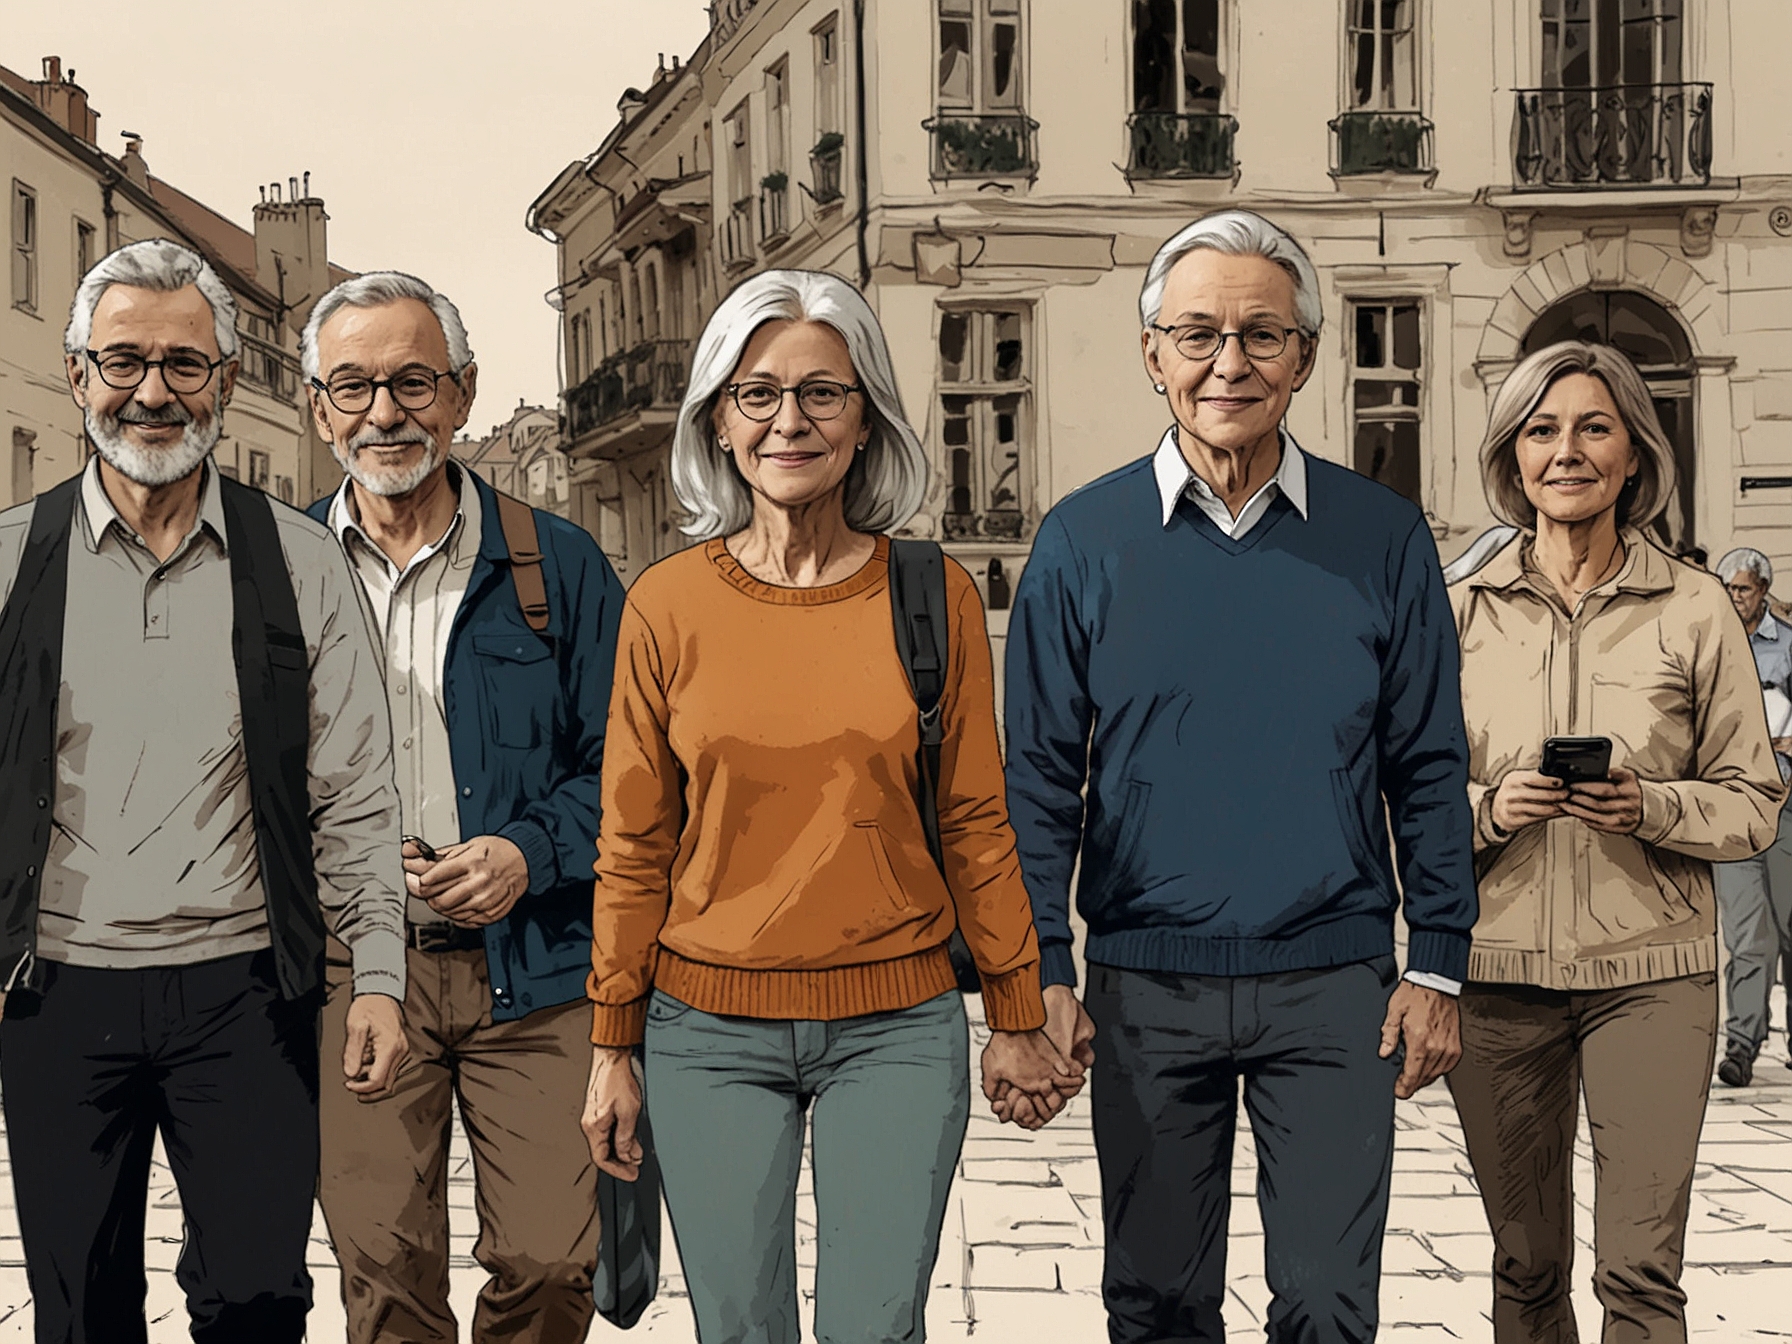 A group of European parents holding hands in solidarity, demonstrating their unified stance against allowing young kids to have smartphones, emphasizing face-to-face interactions and physical activities.